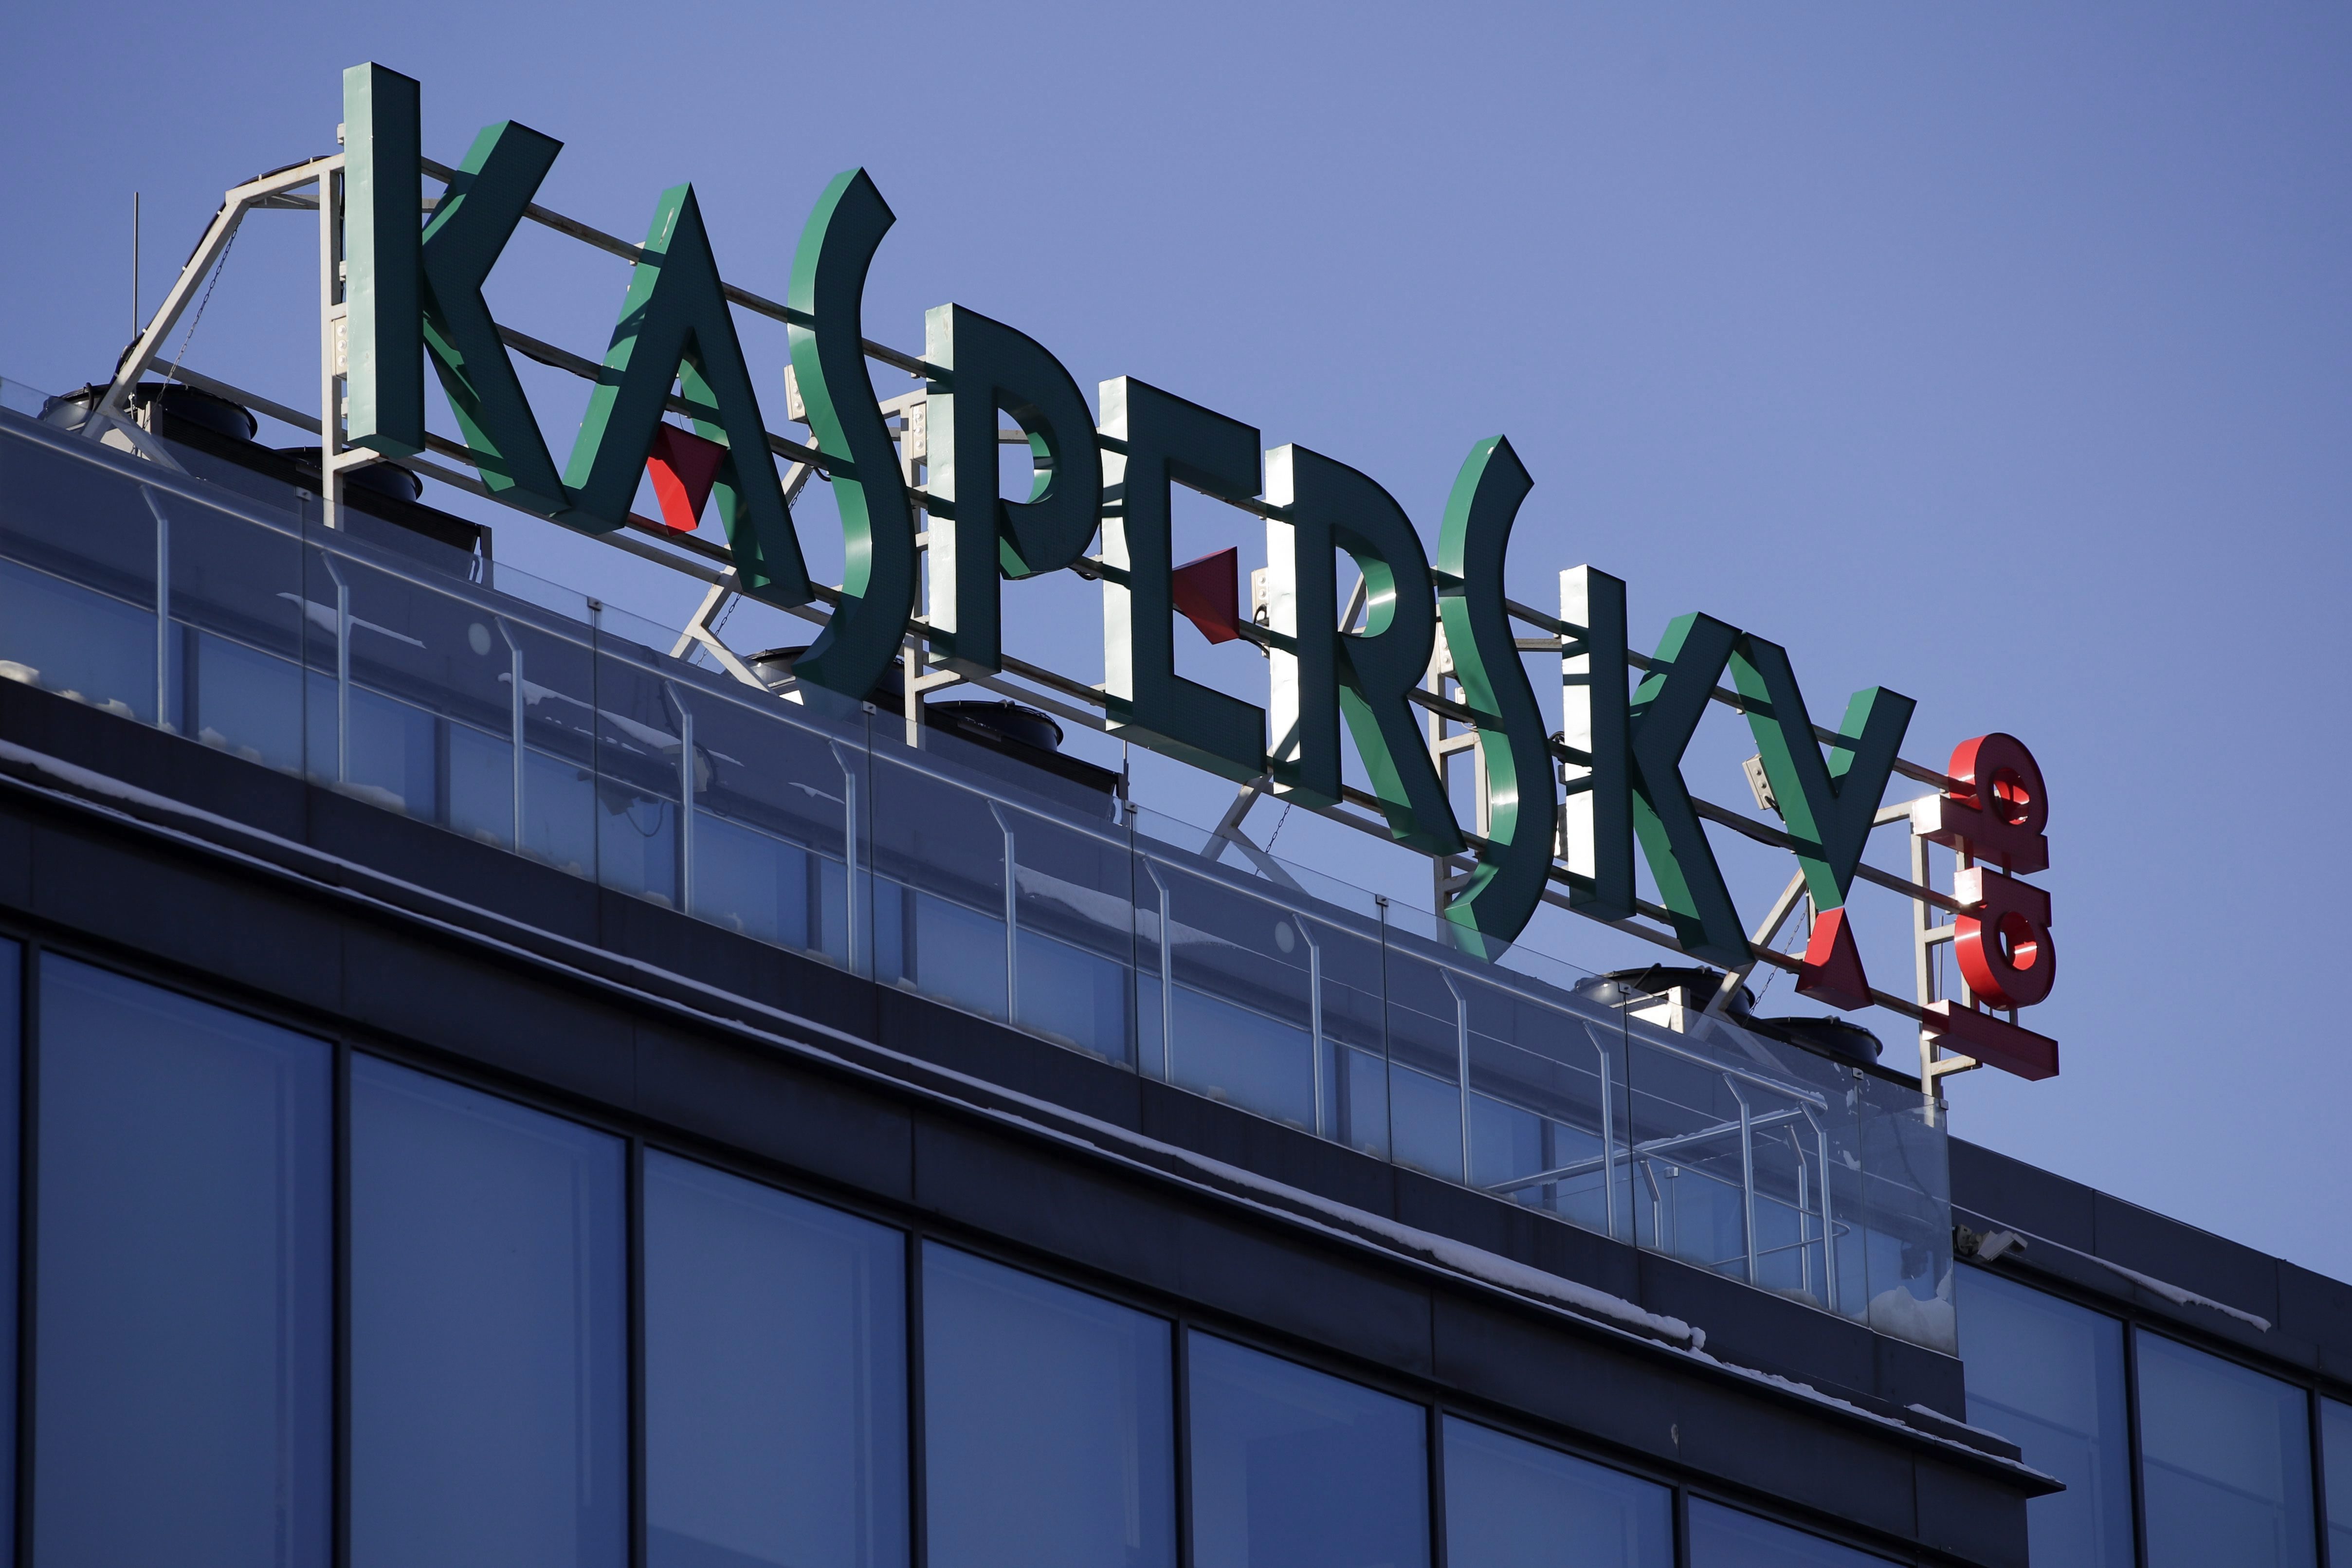 U.S. to ban Kaspersky cybersecurity products over security concerns